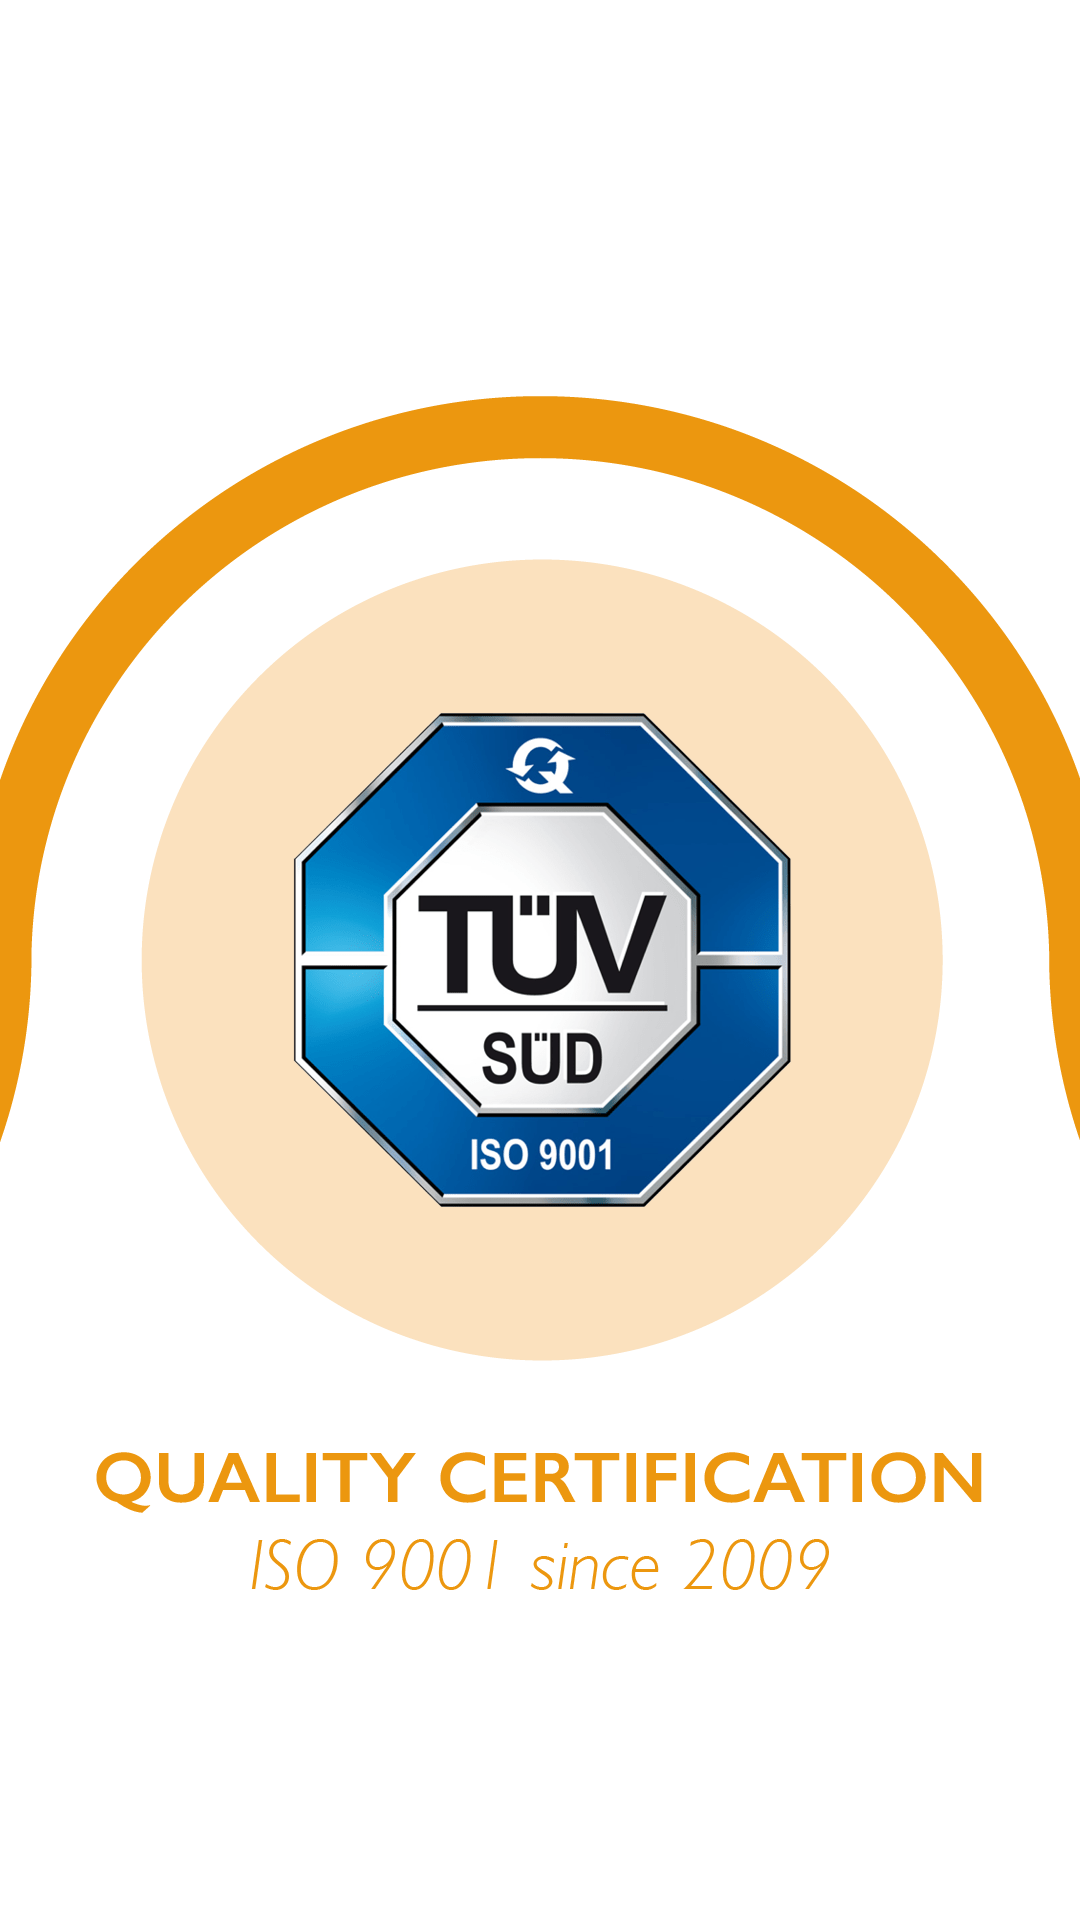 QUALITY CERTIFICATION - ISO 9001 since 2009